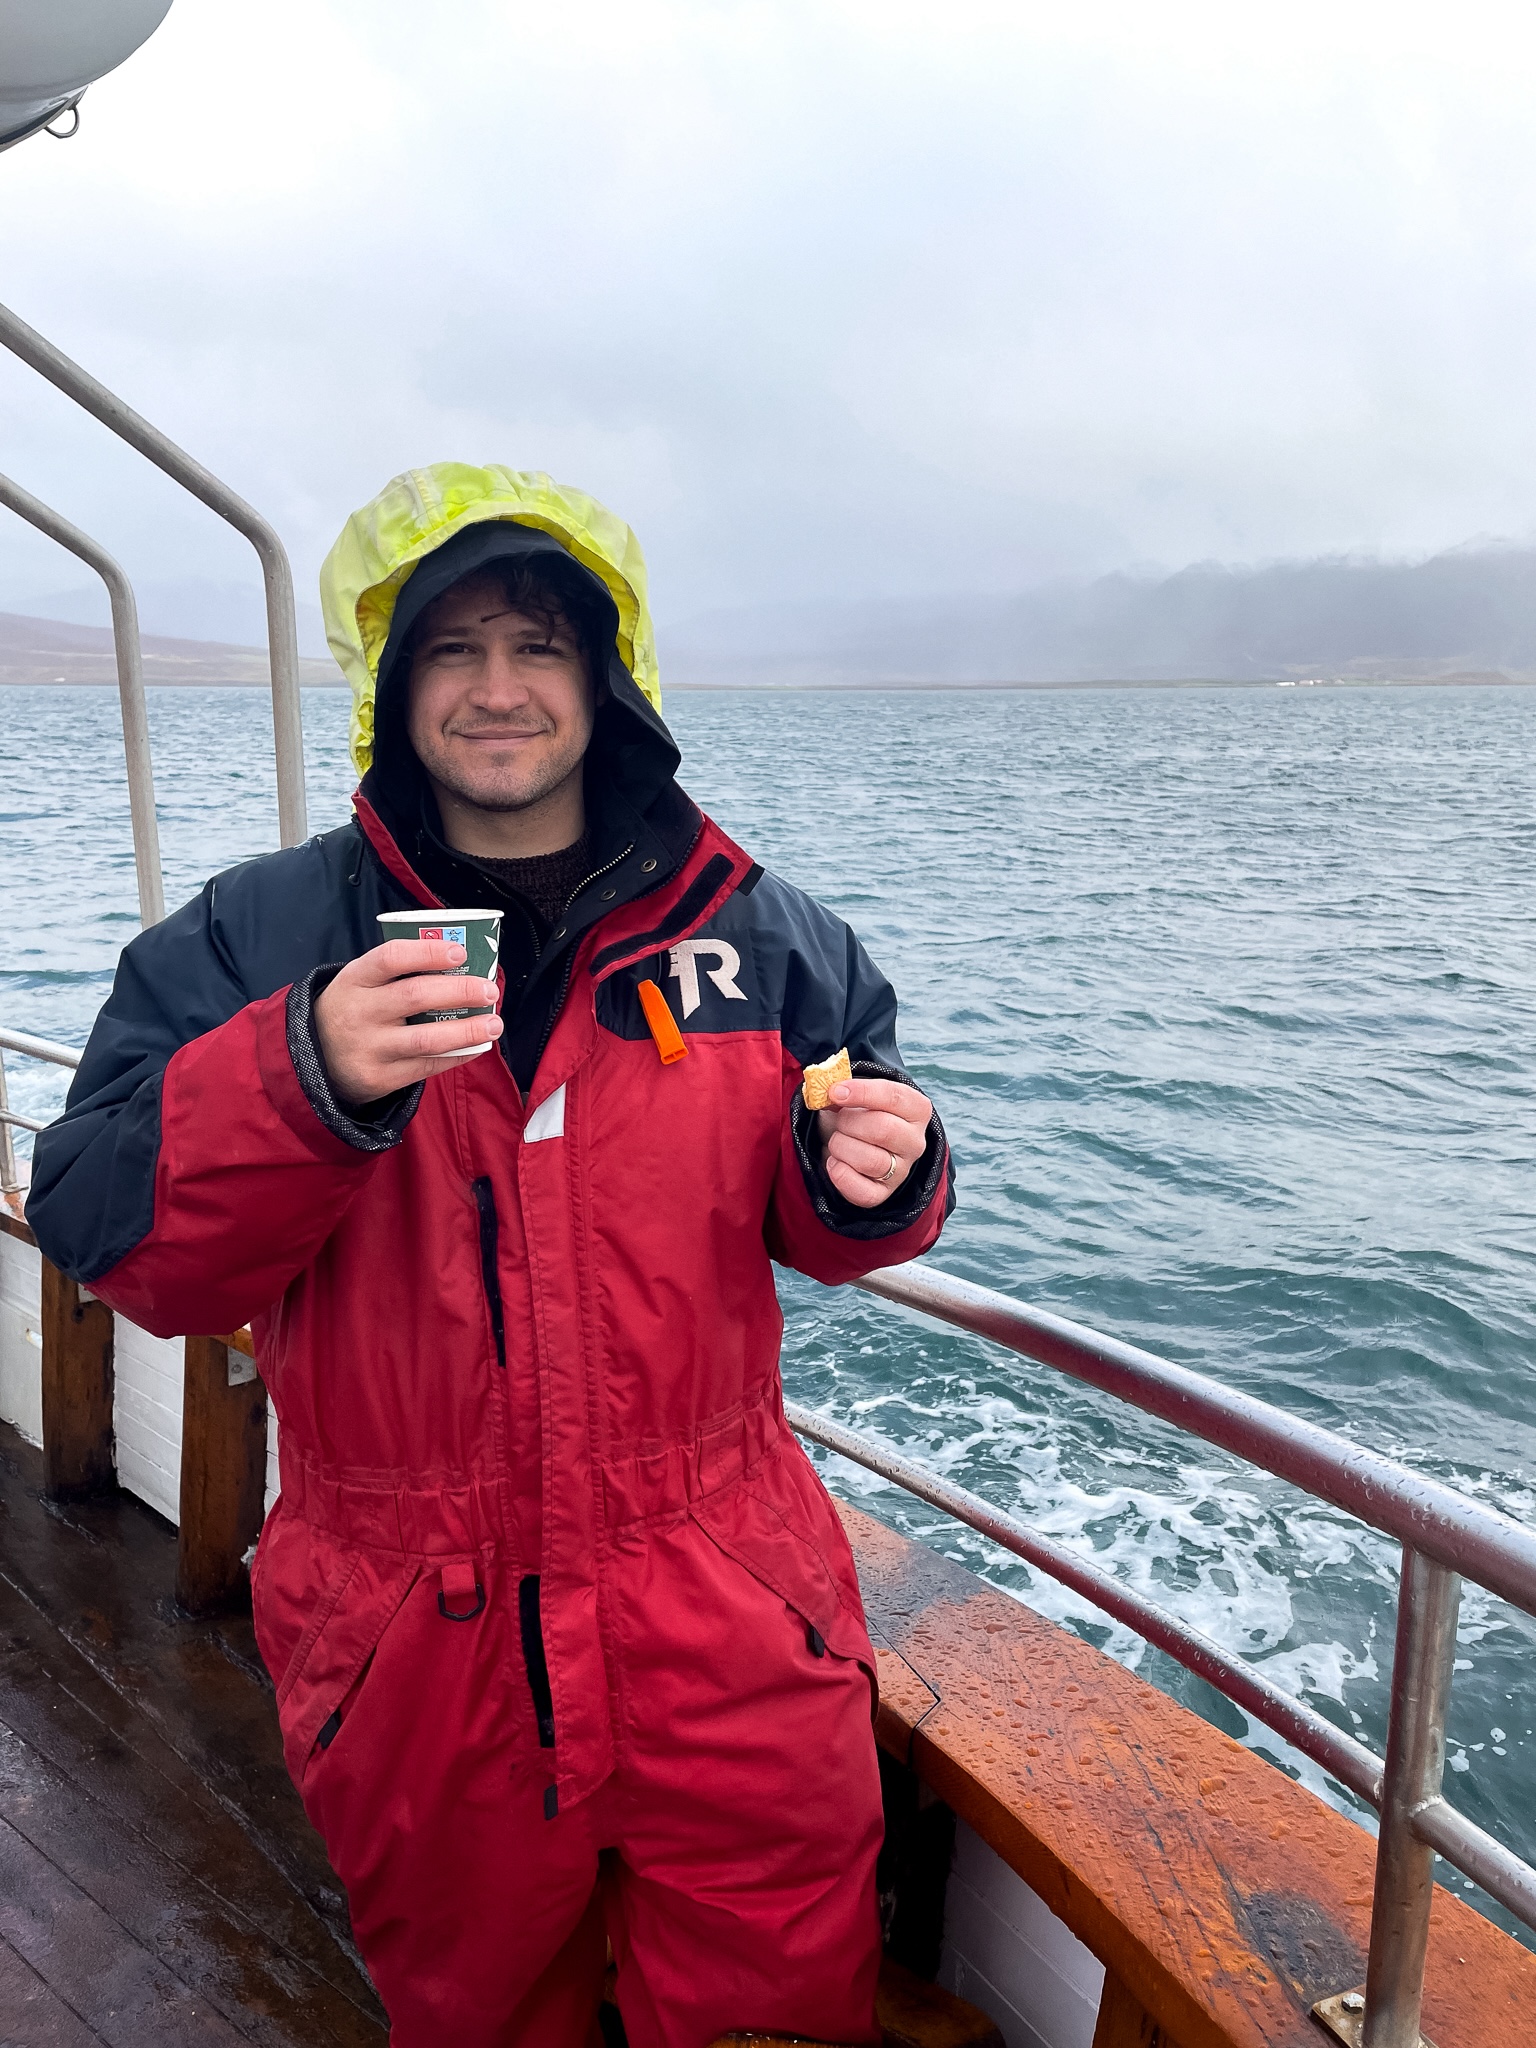 Simon with a red waterproof suit holding hot chocolate and a cheap biscuit smiles with the water of the fjord and mountains in the backgroun